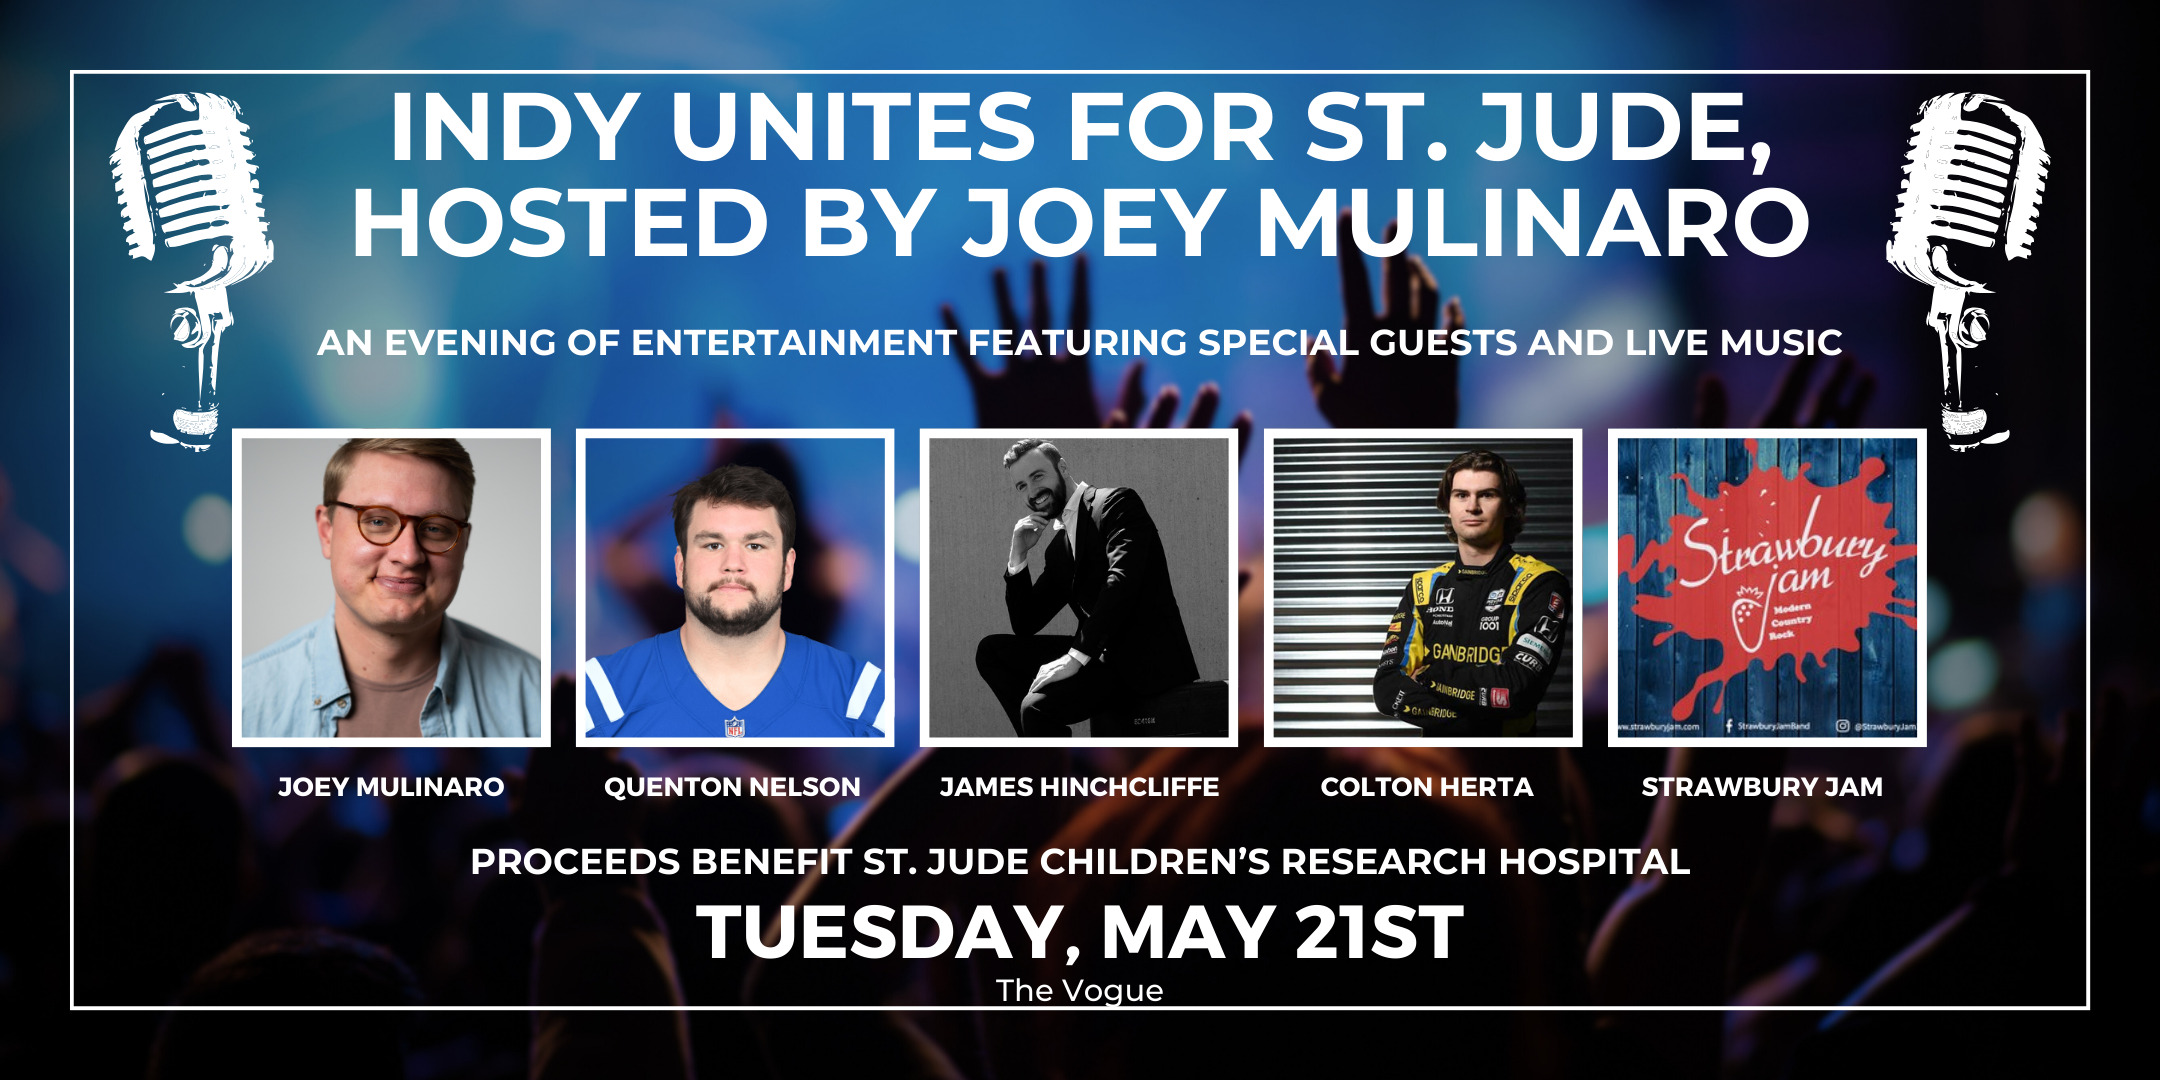 Indy Unites for St. Jude, Hosted by Joey Mulinaro